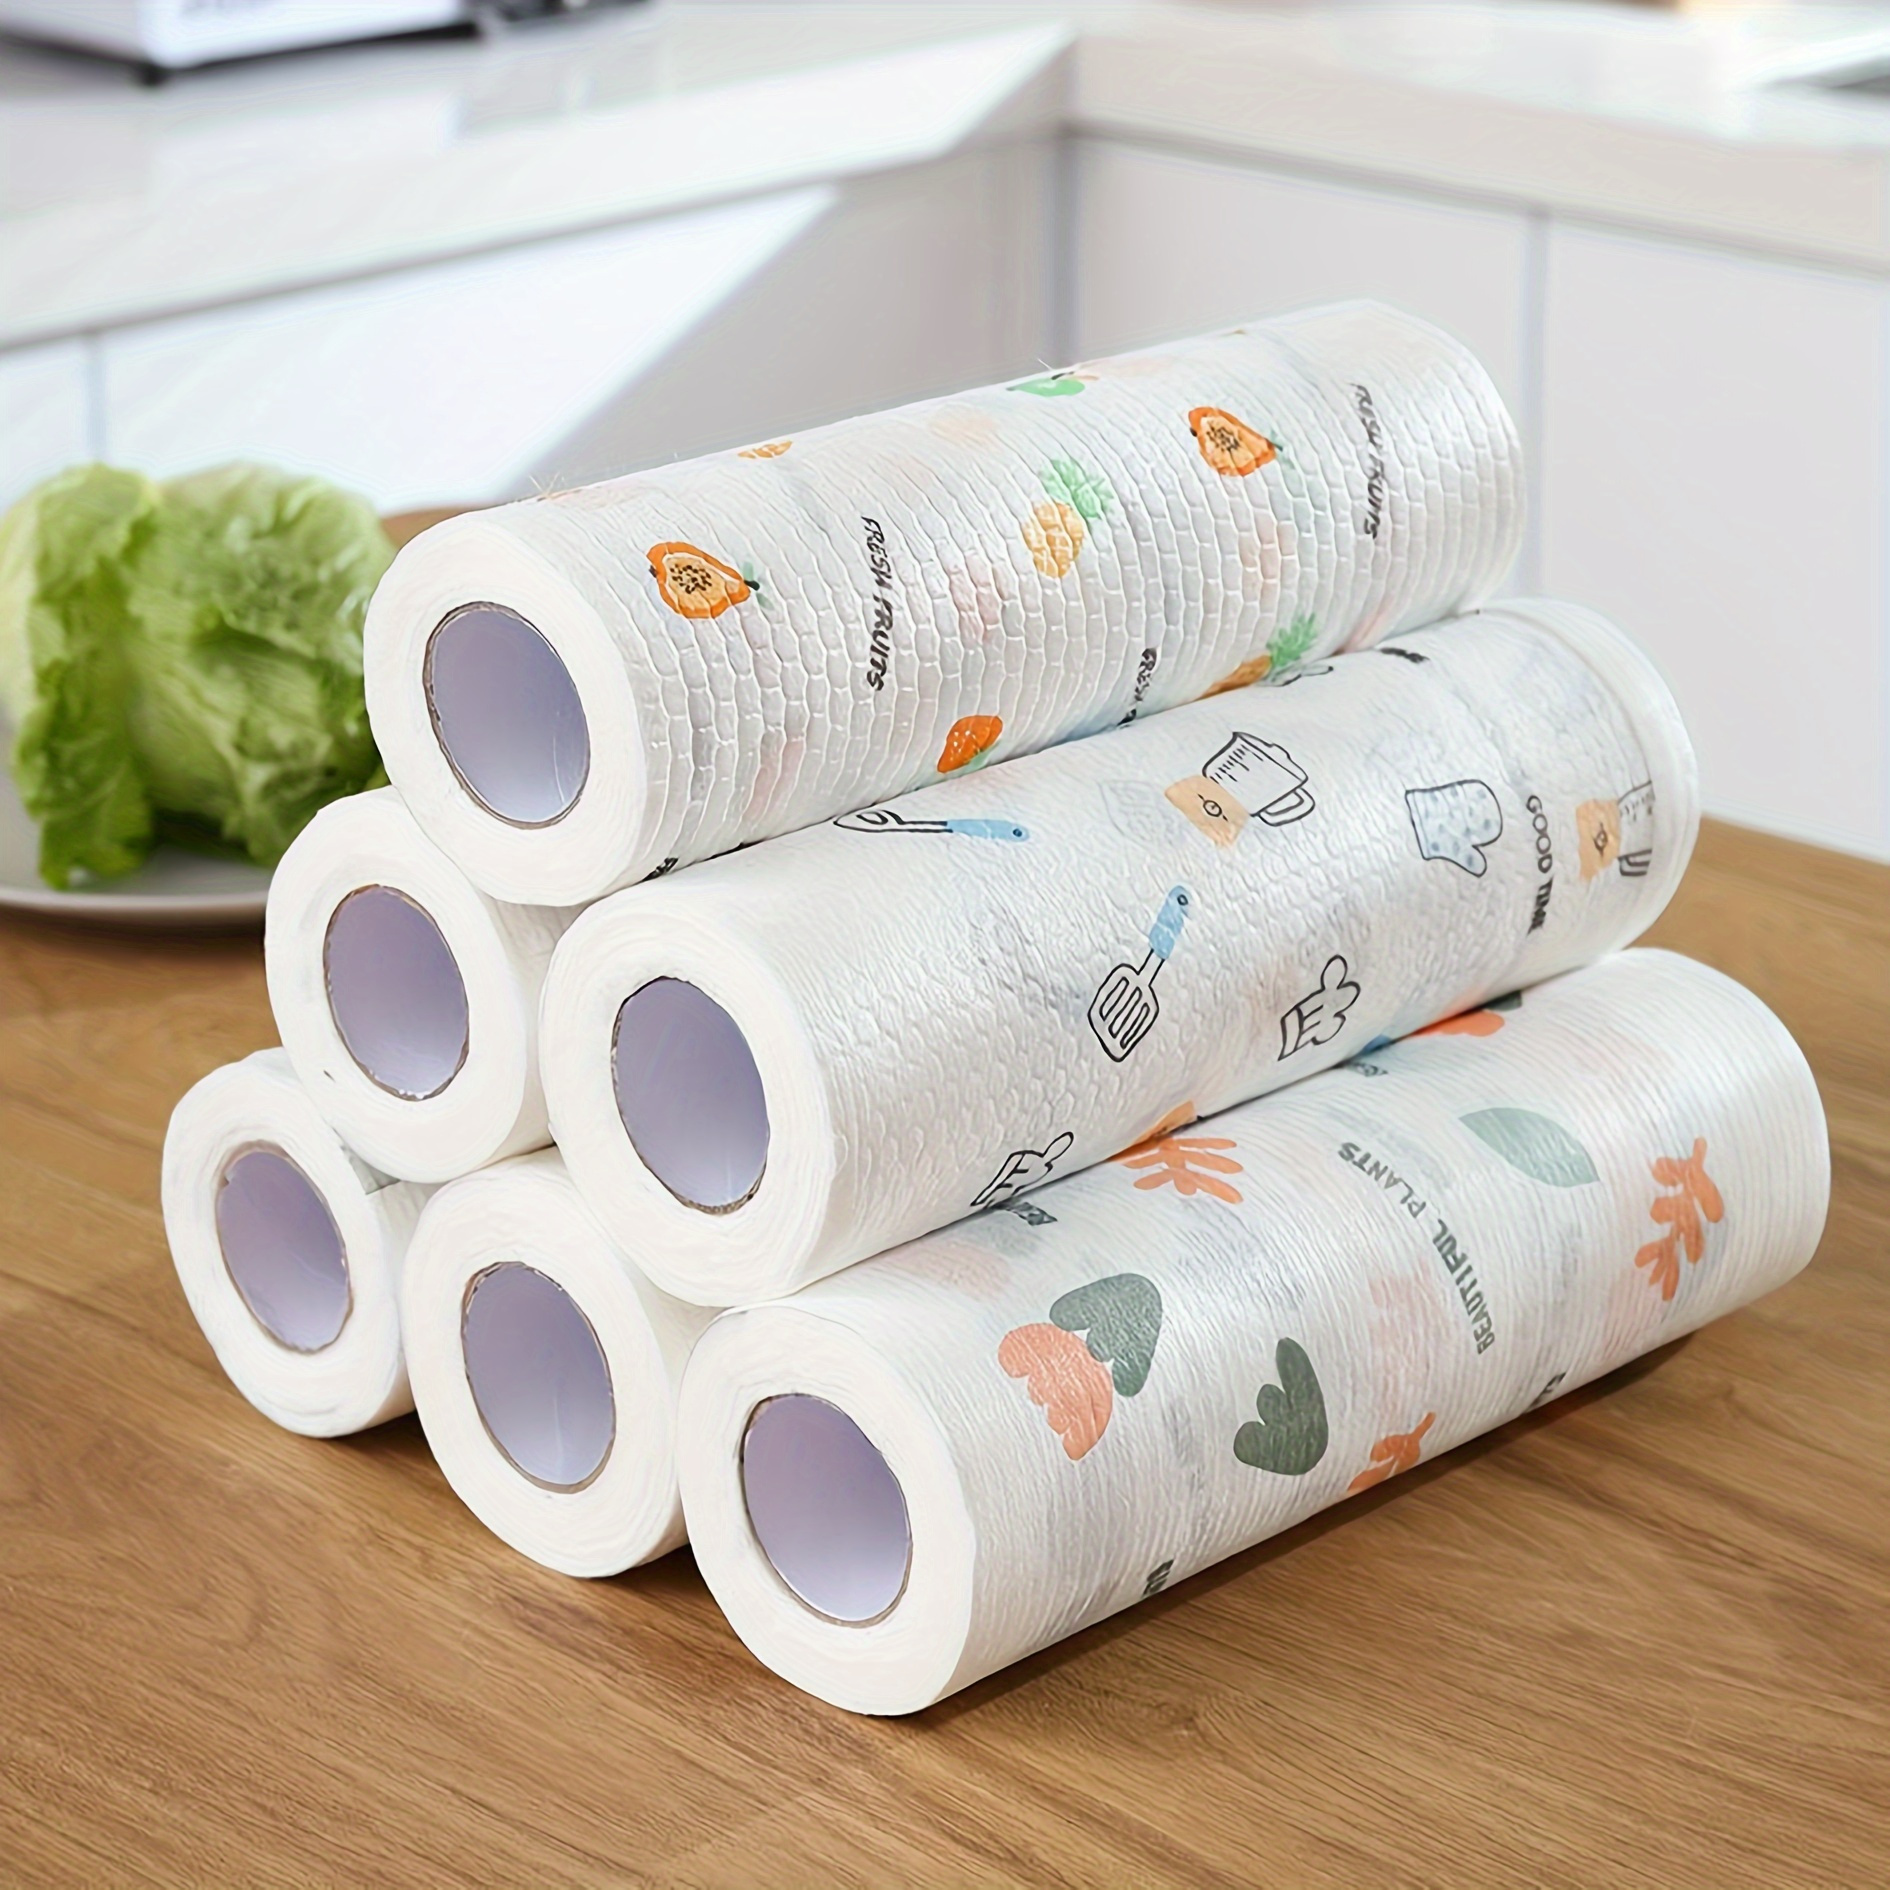 23  cleaning gadget helps mum 'eliminate paper towels